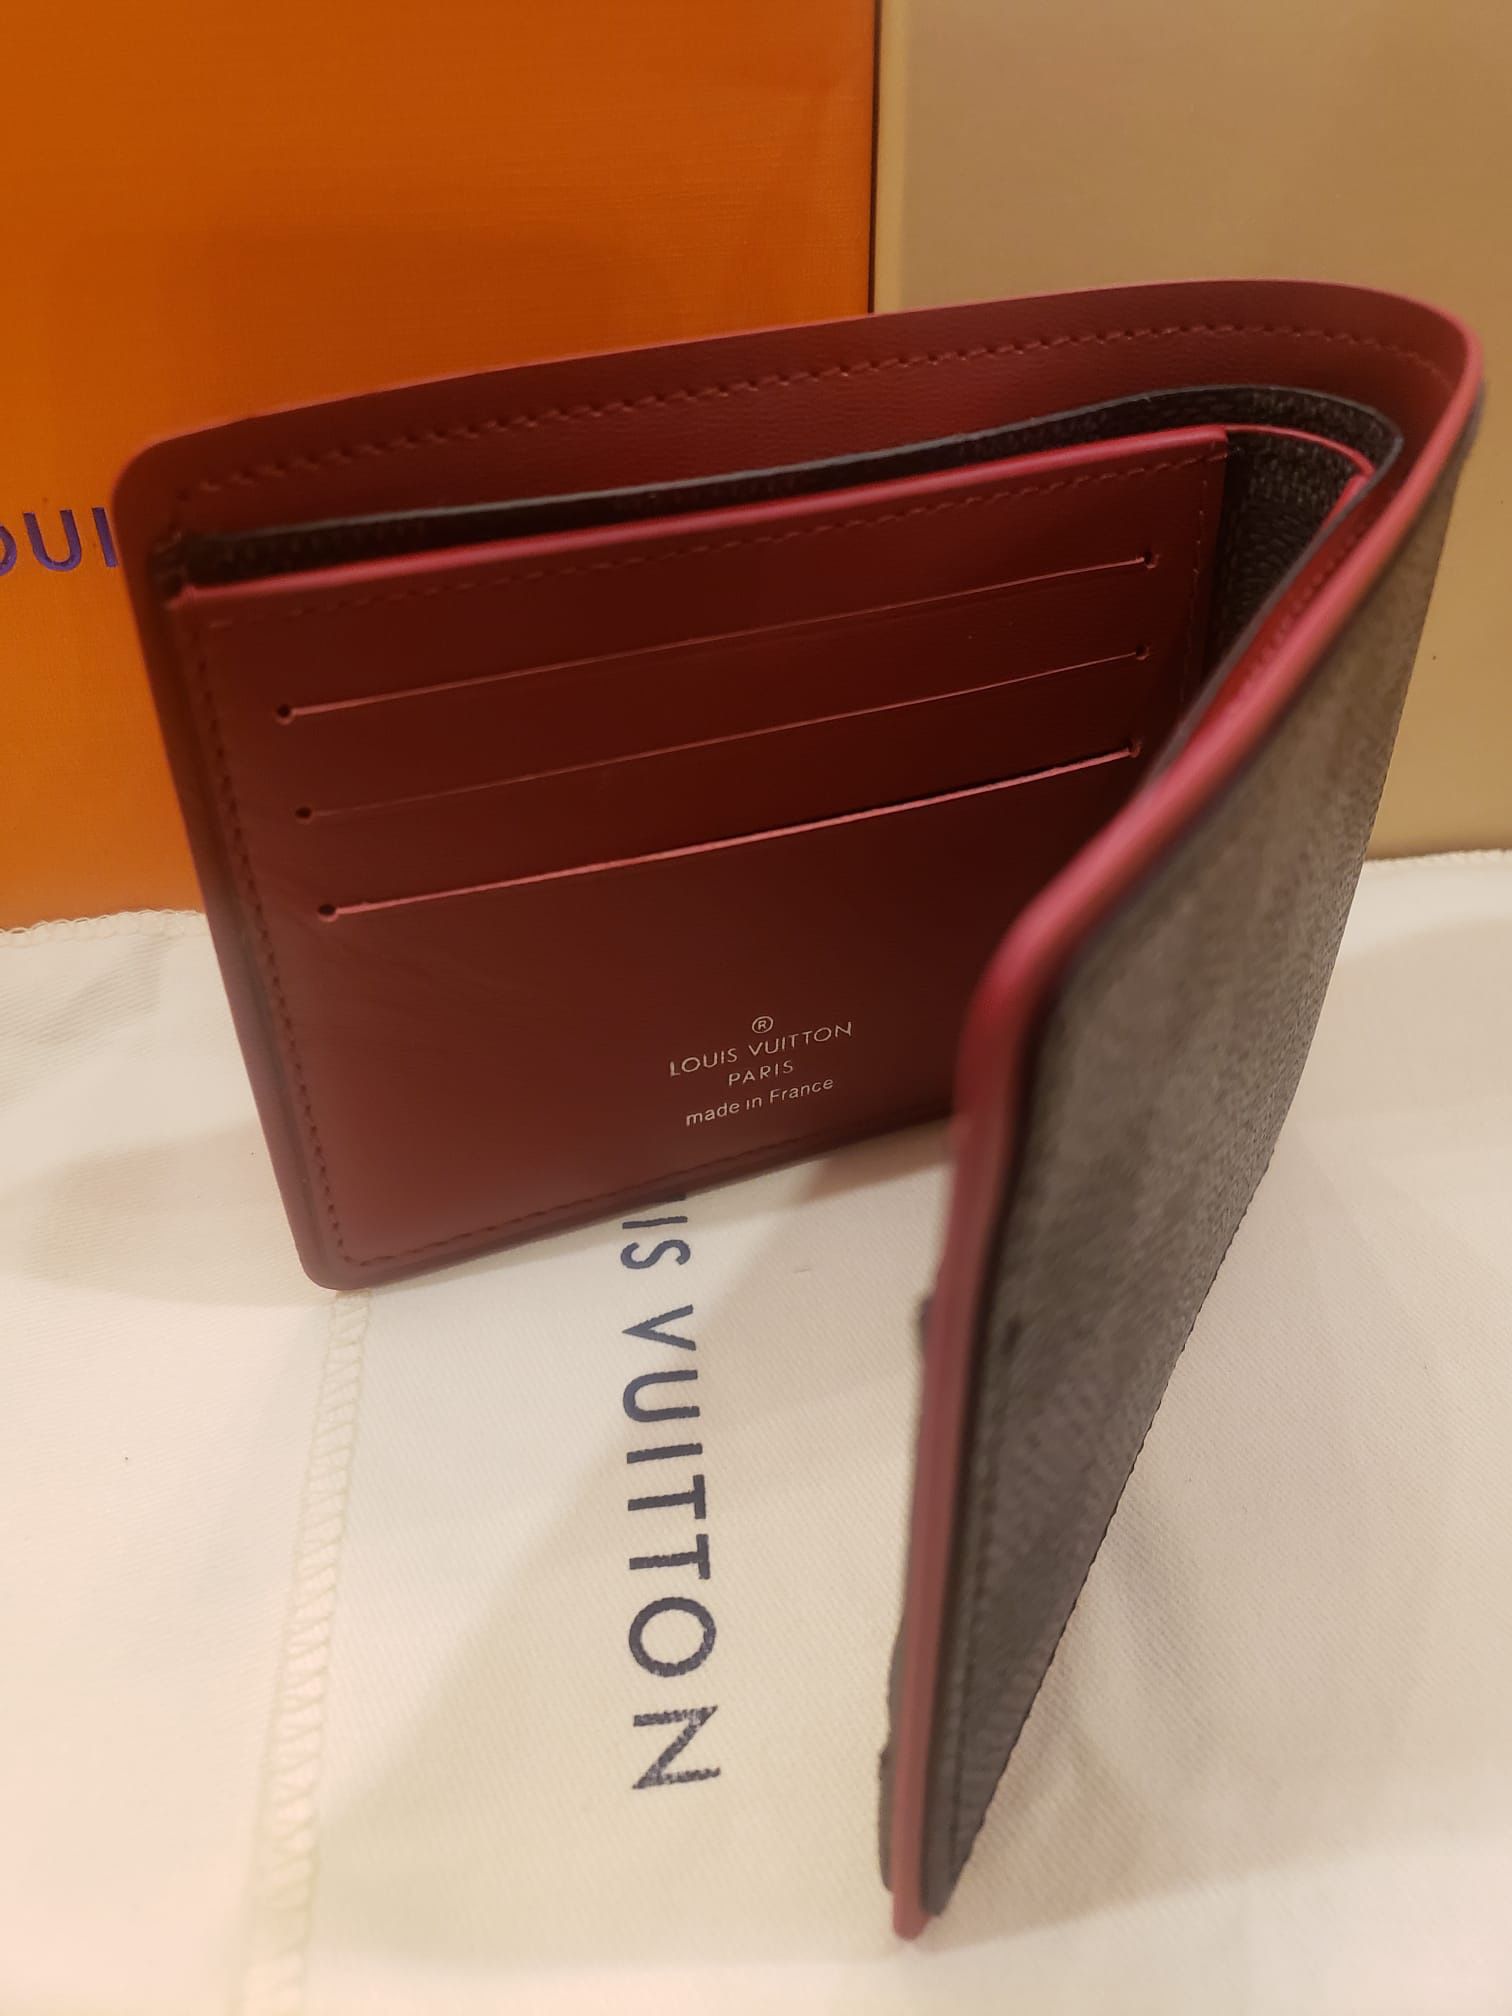 Louis Vuitton Black Red Wallet for Sale in Queens, NY - OfferUp